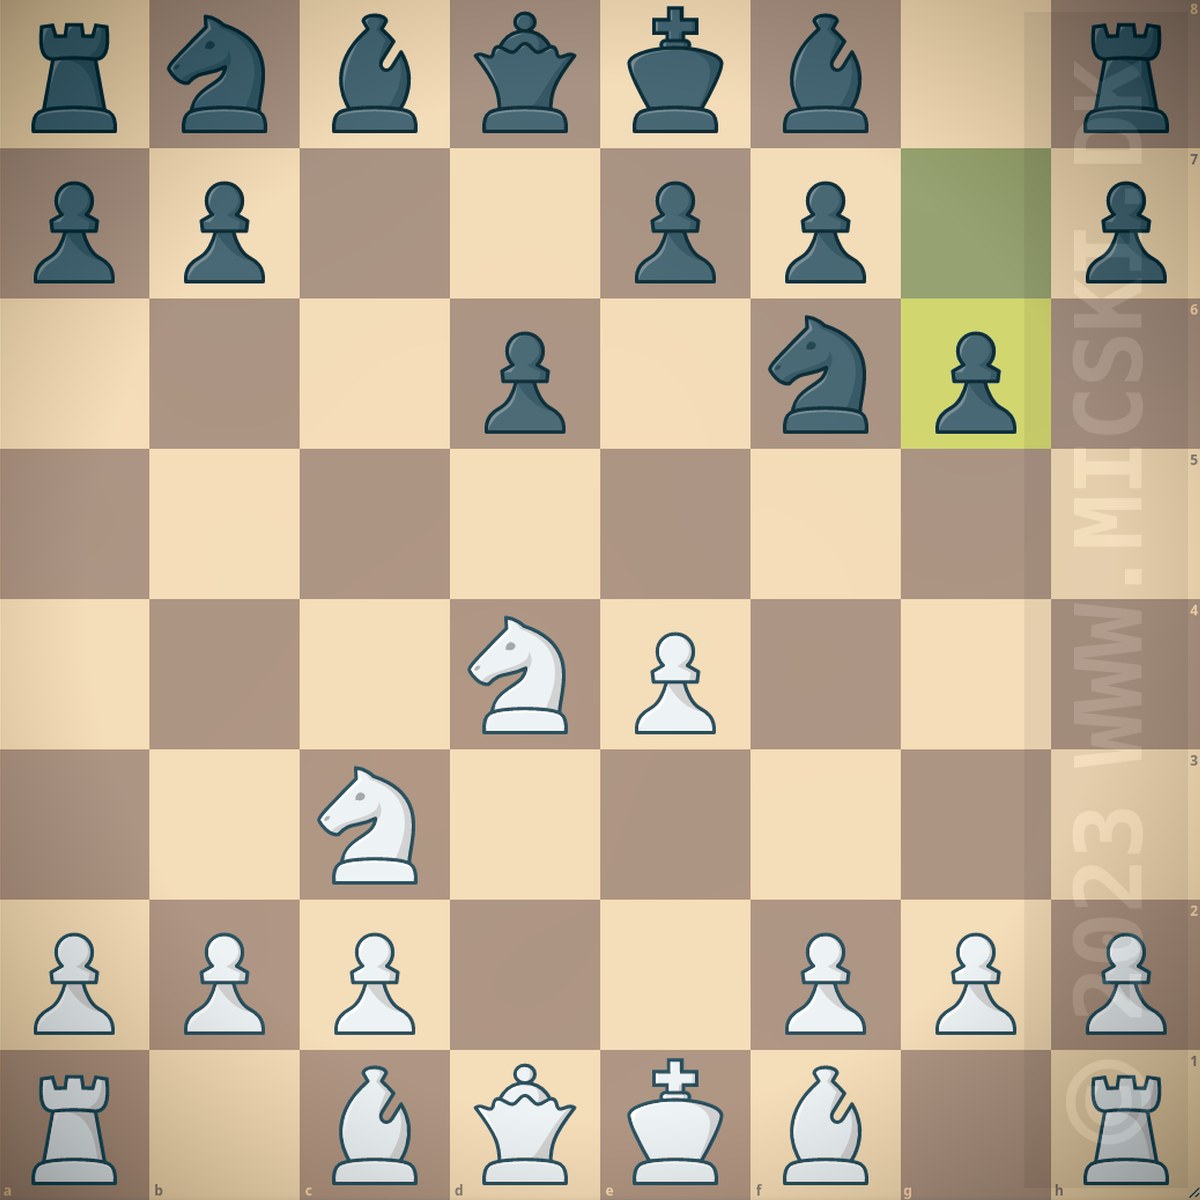 The Dragon variant of the Sicilian chess opening as white.